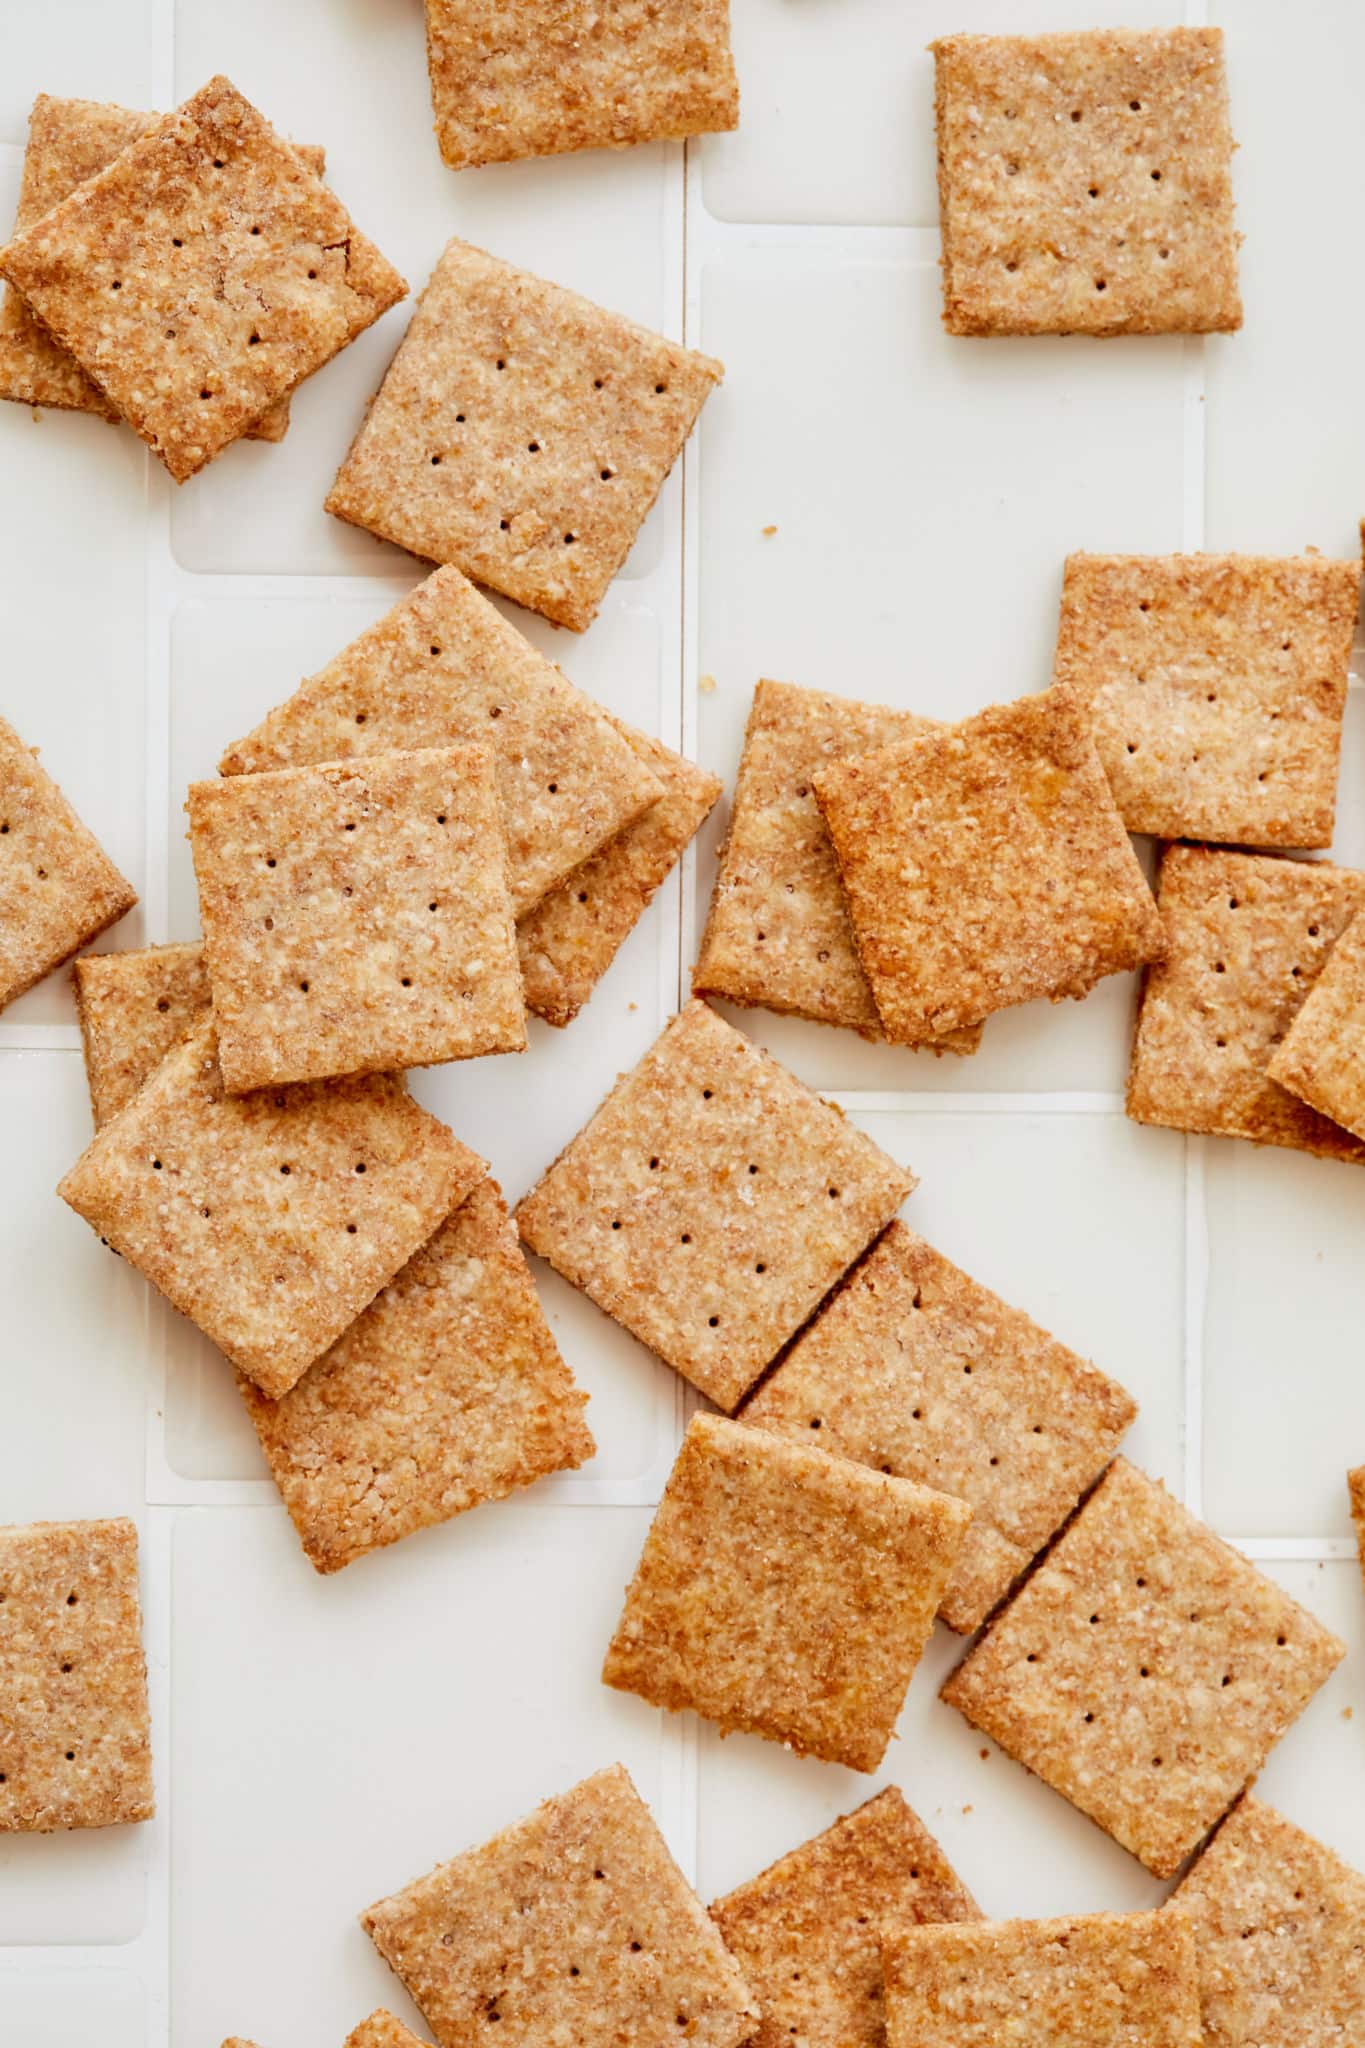 A number of homemade wheat thins, which are evenly sized and baked, are on top of a white gridded background.